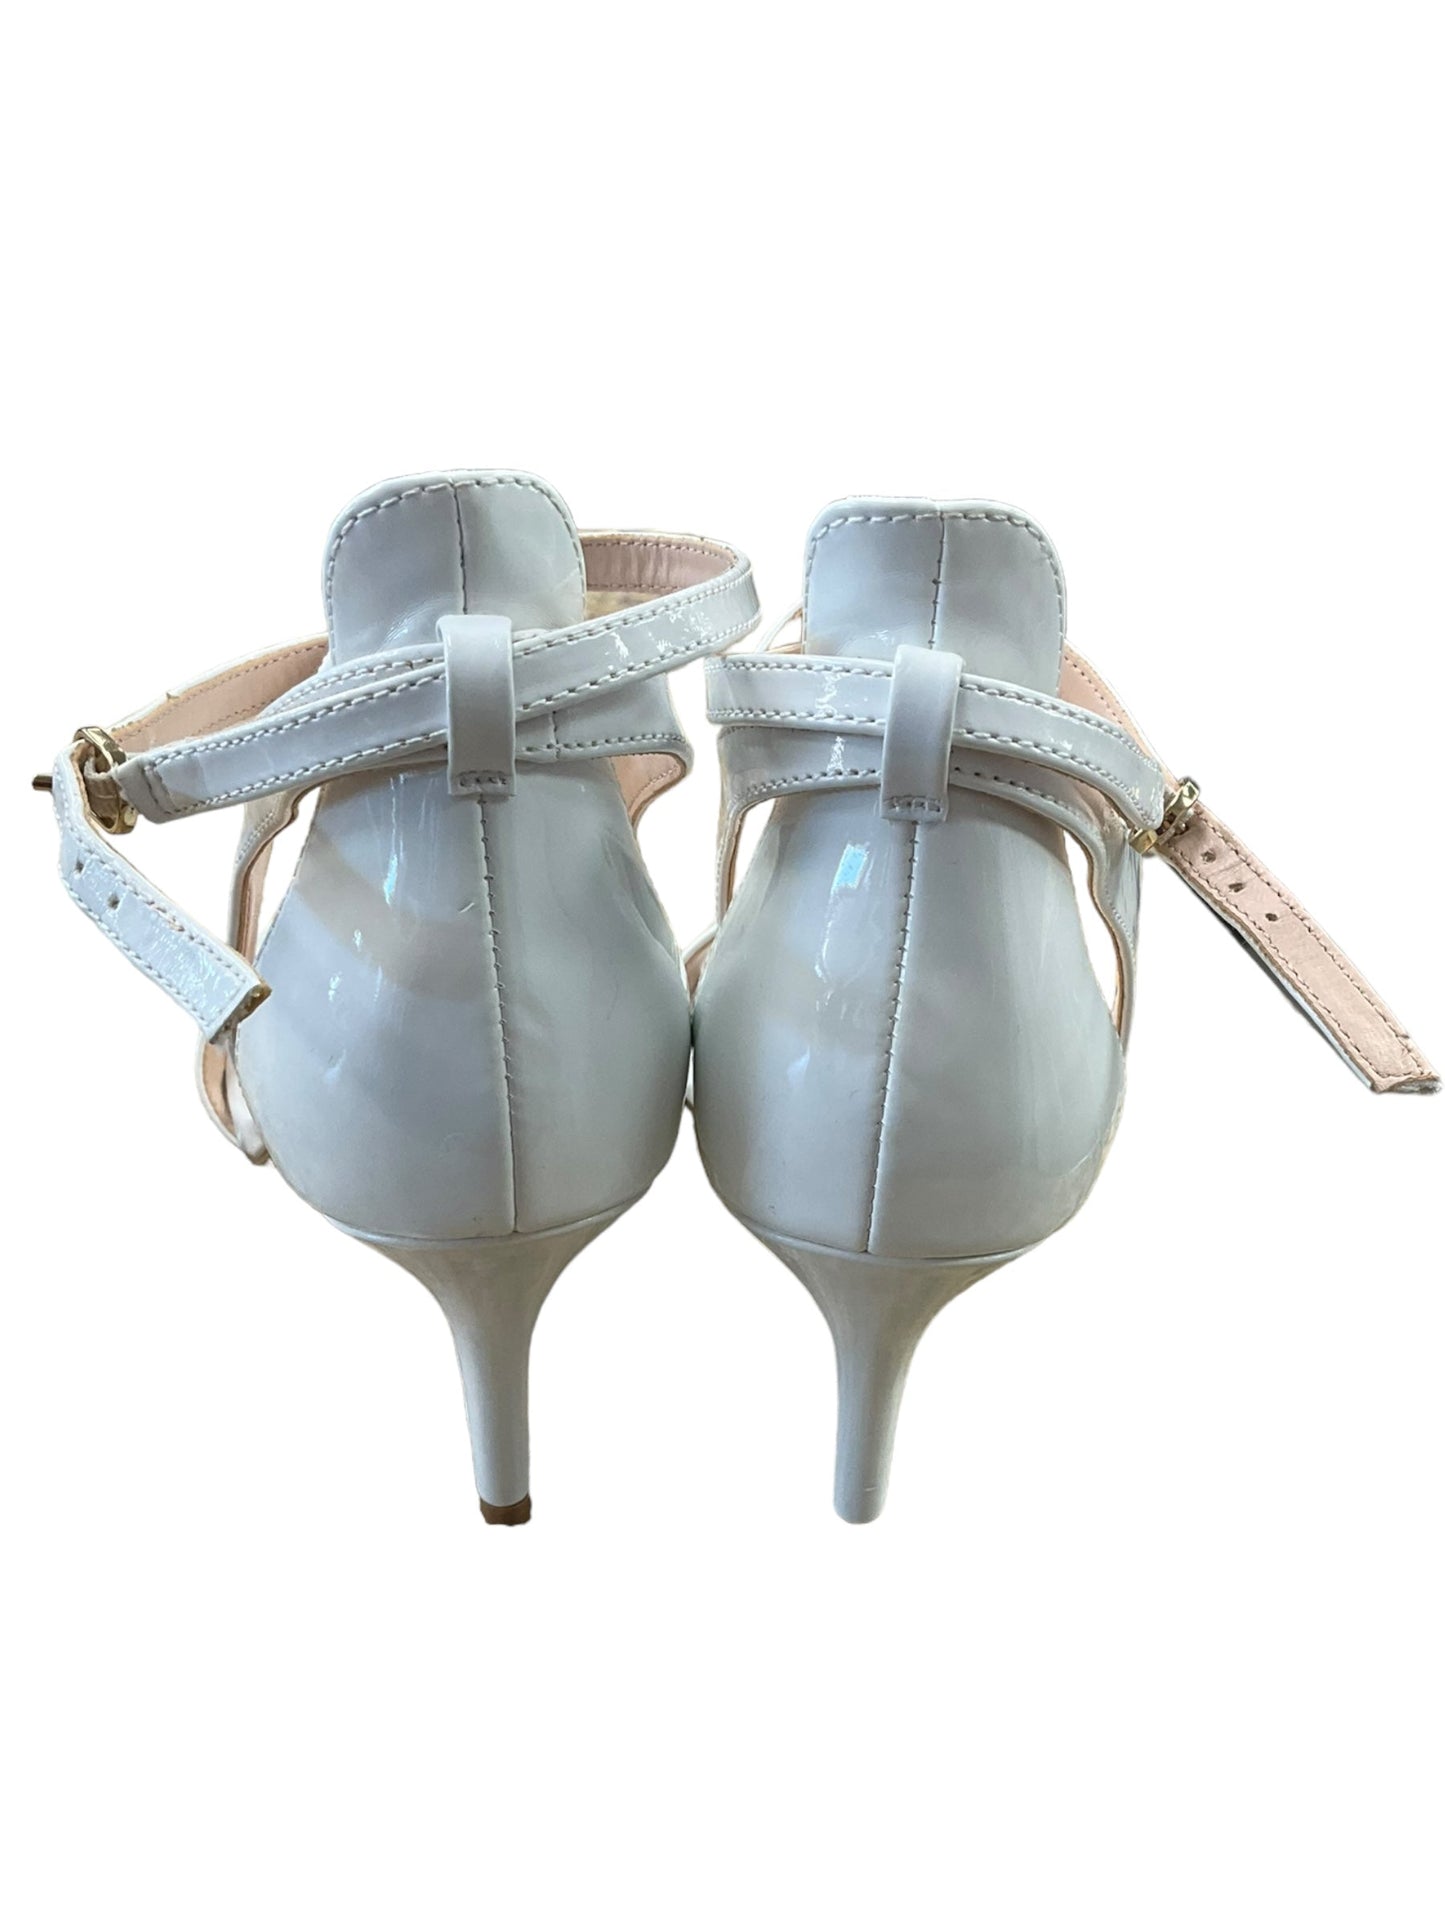 White Shoes Heels Stiletto Kelly And Katie, Size 8.5